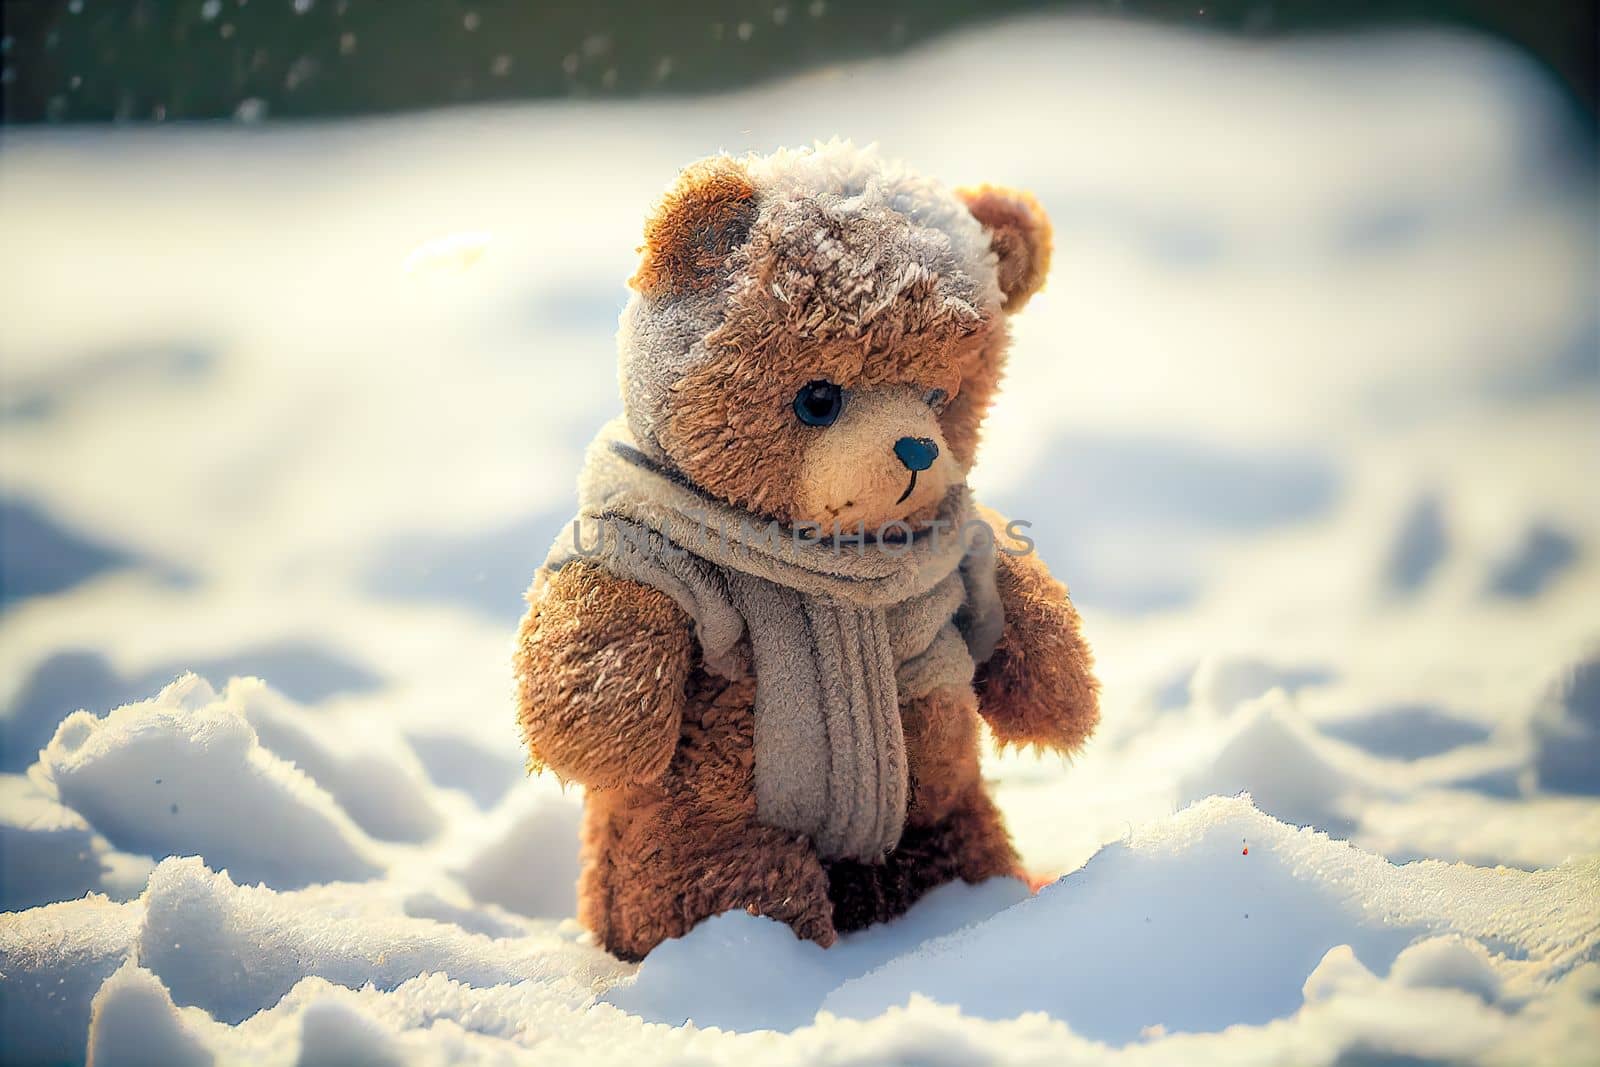 Light brown teddy bear with scarf sitting on white snow. Enjoying cold winter day. 3D illustration